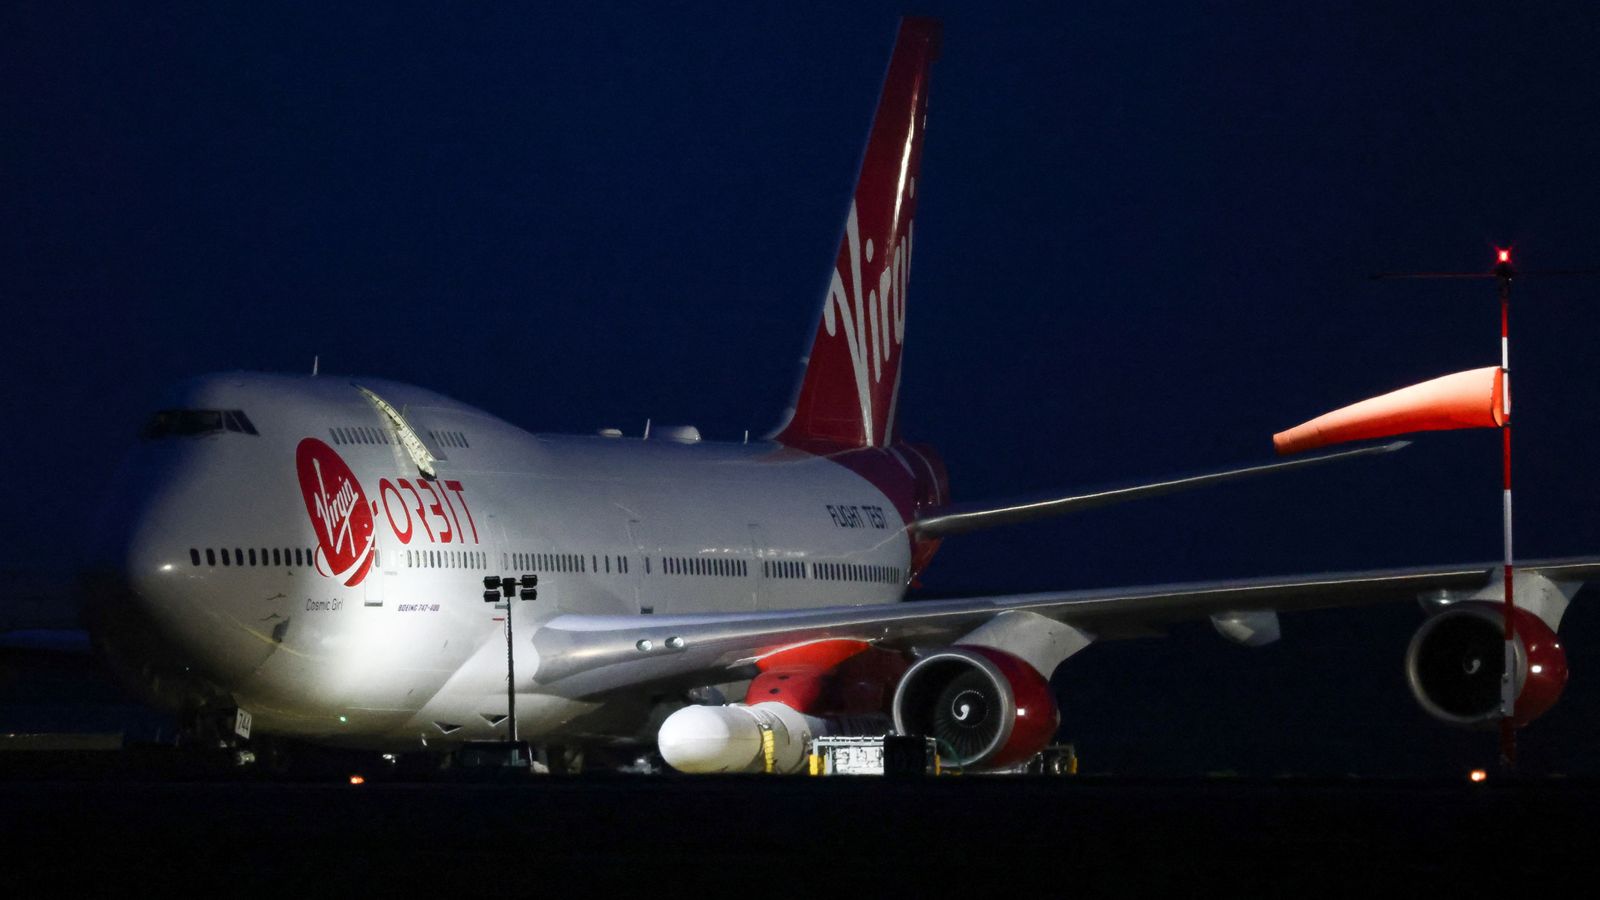 Virgin Orbit plans for insolvency amid rescue talks with investors